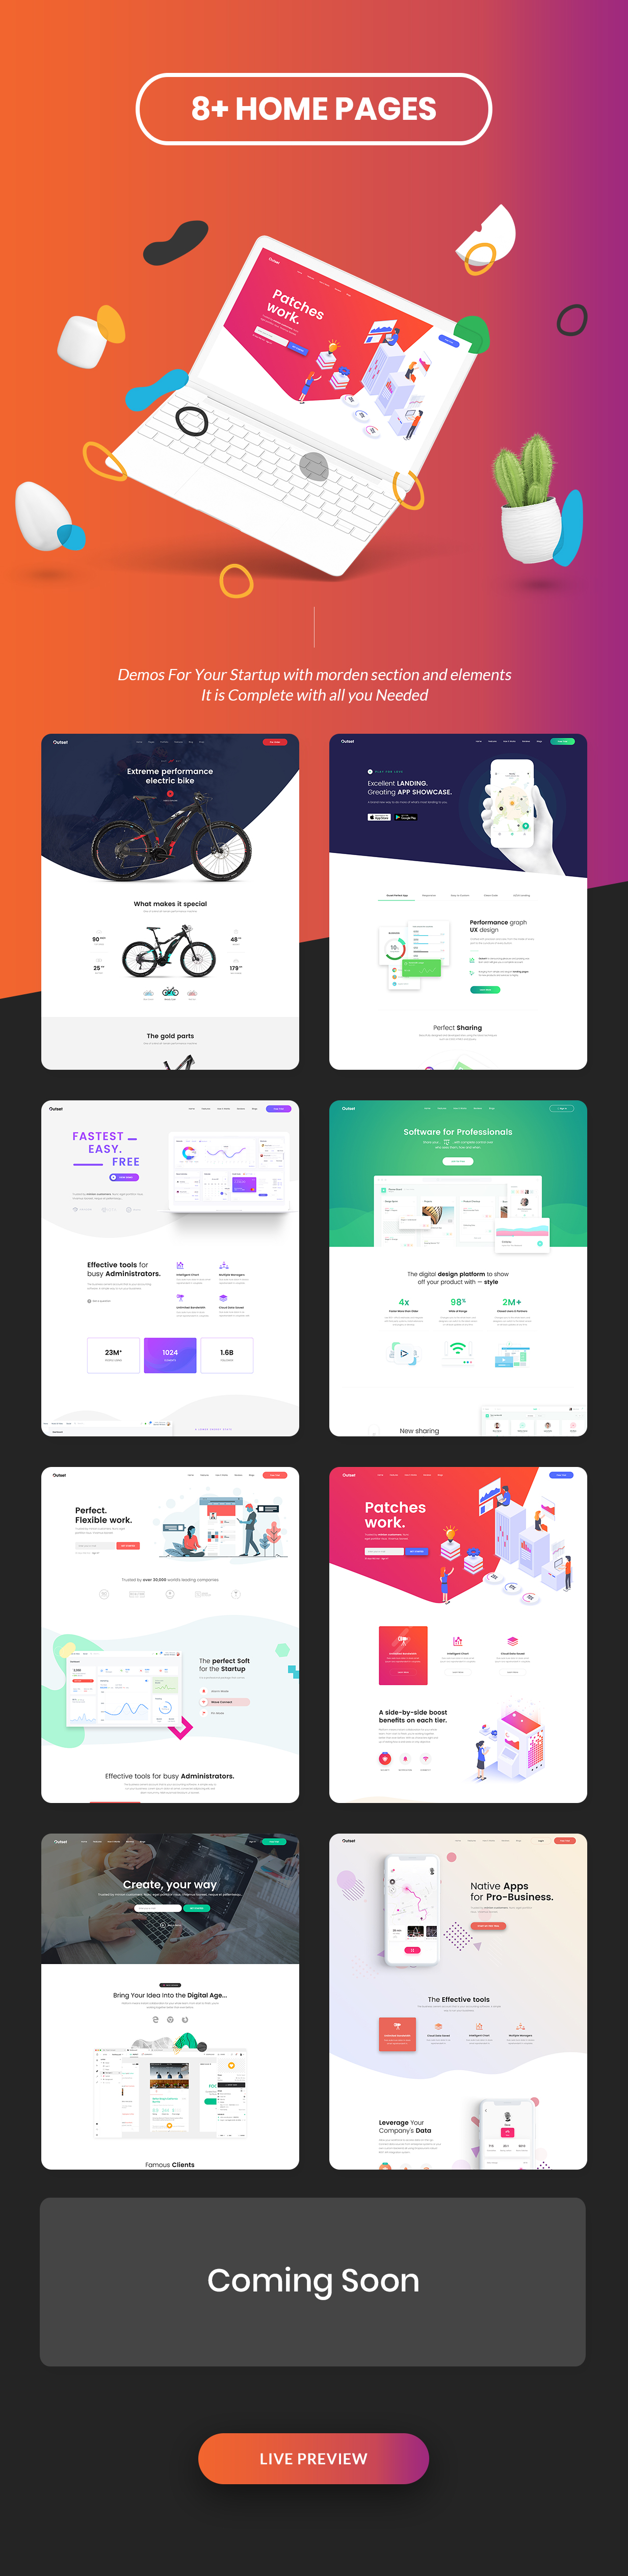 The Outset - MultiPurpose HTML5 Template for Saas & Startup - 4